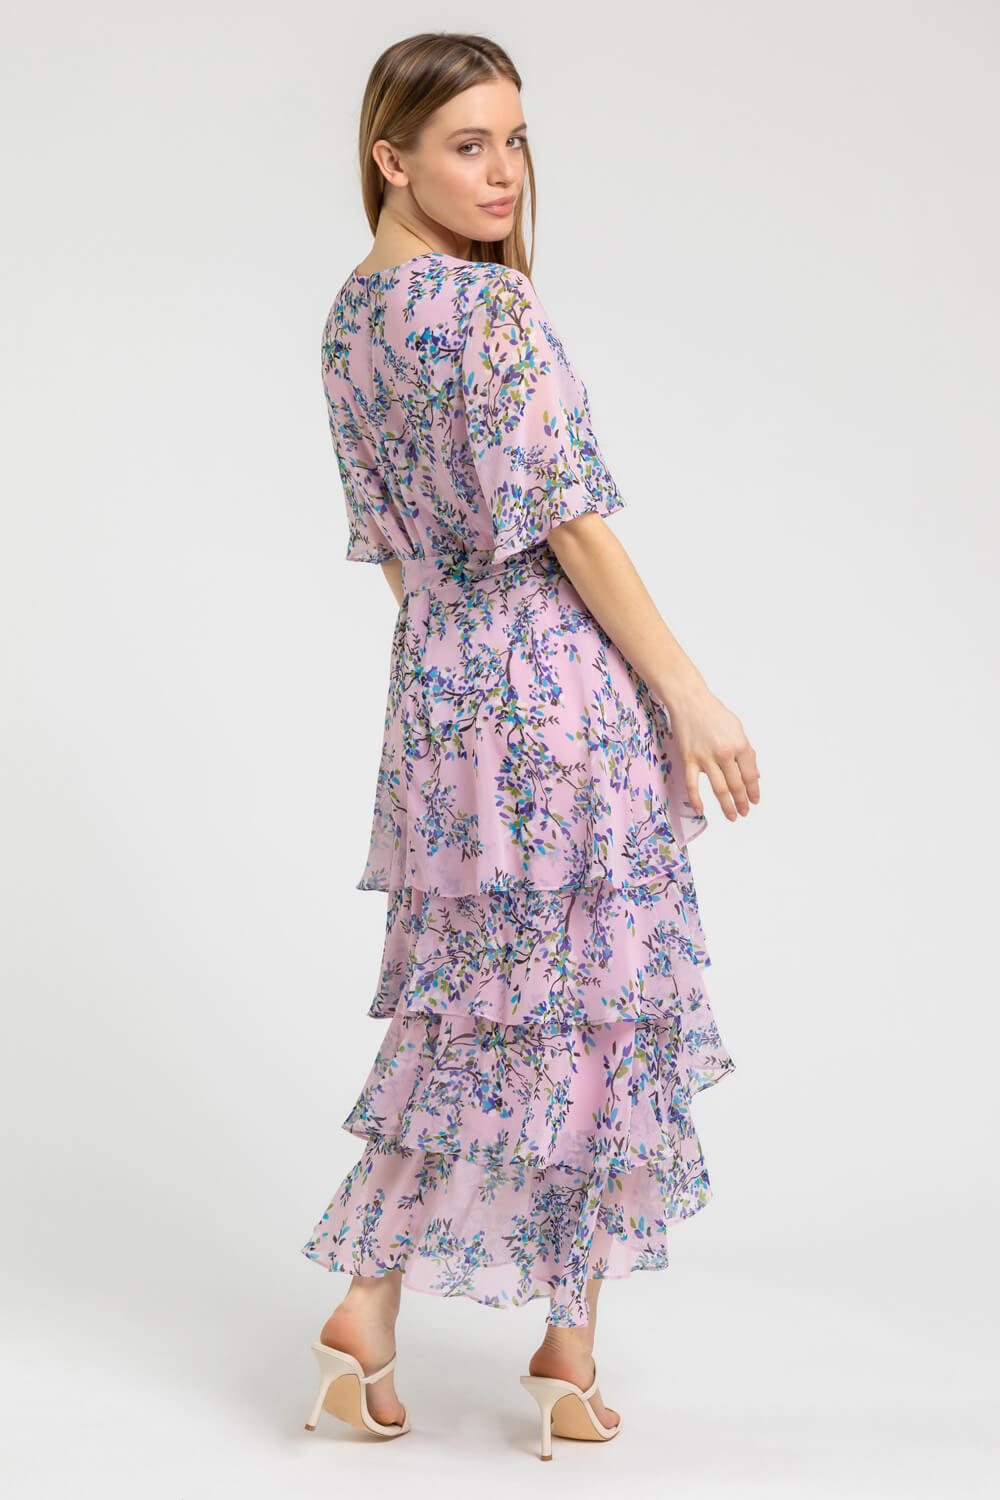 Lilac Petite Floral Print Tiered Dress, Image 2 of 5